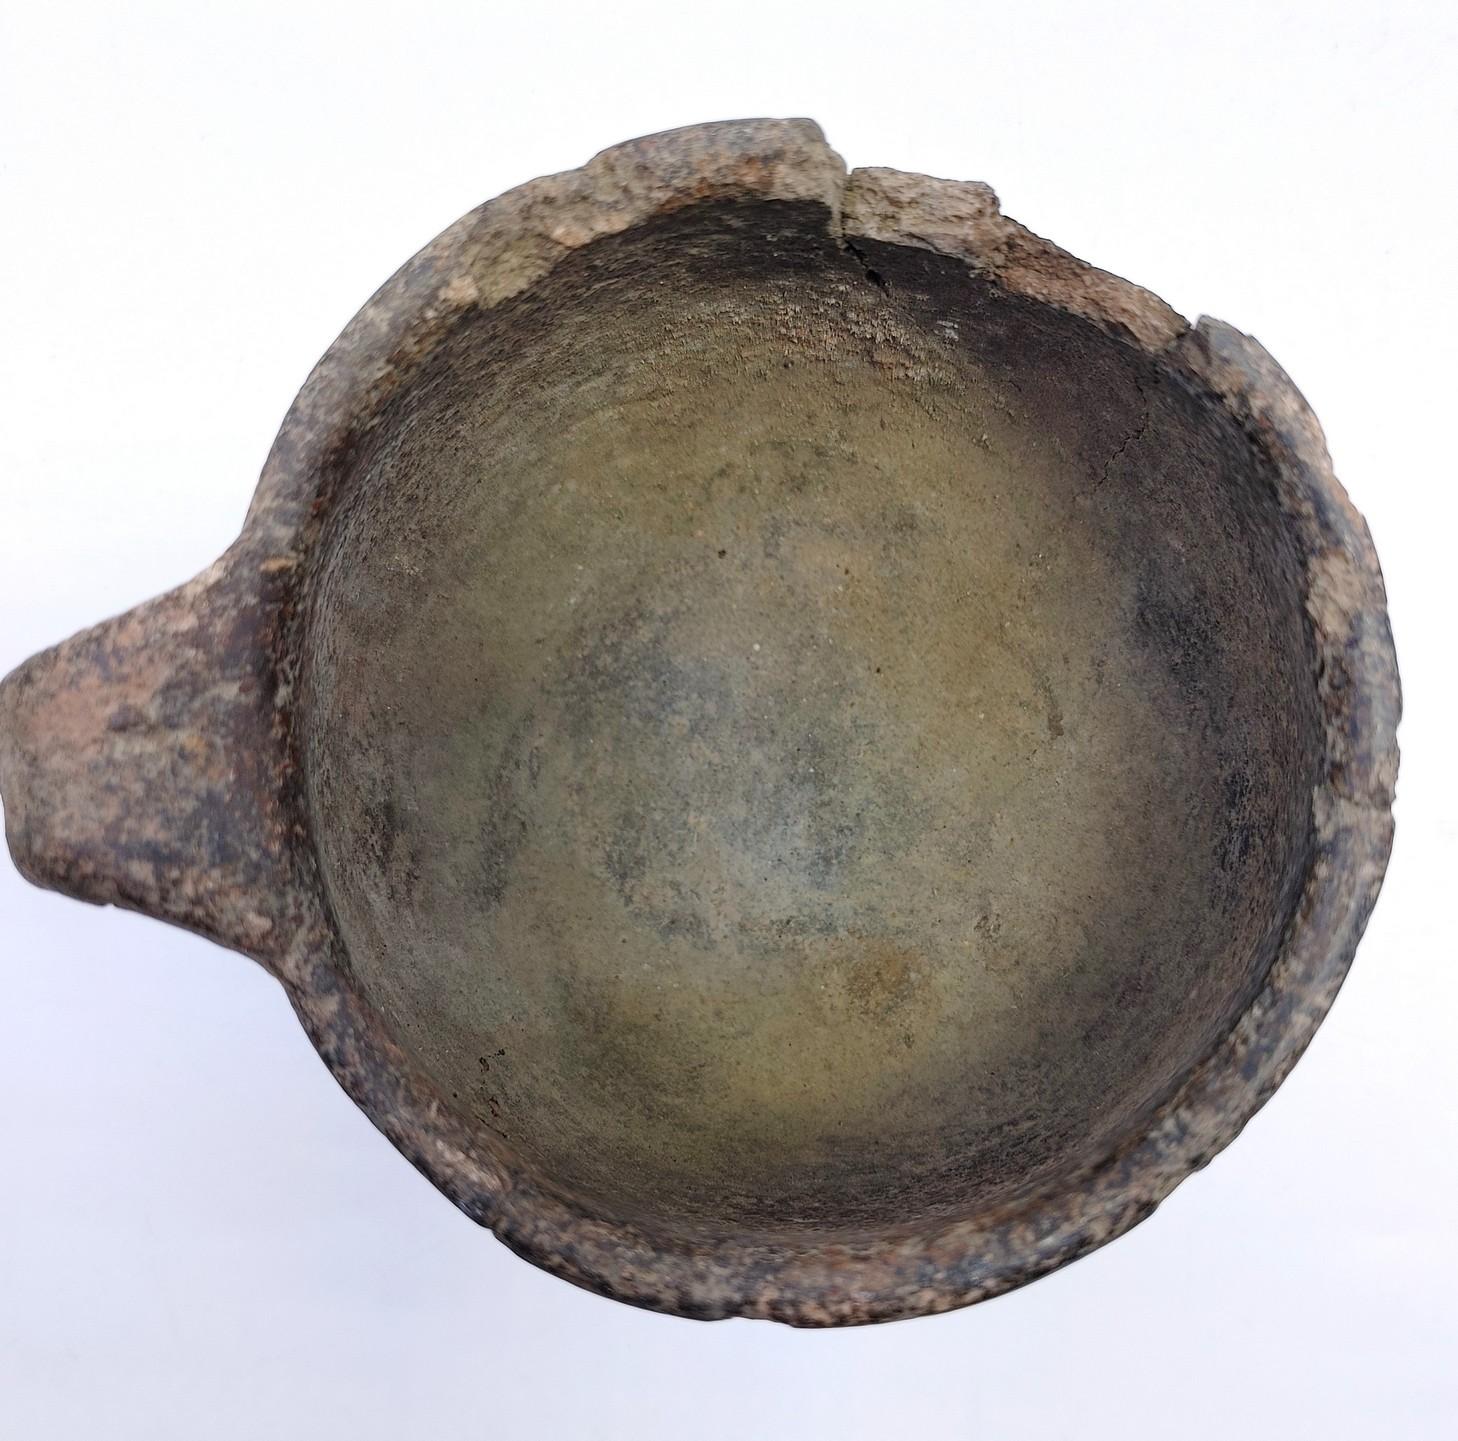 Pre-Historic American Indian Clay Cup